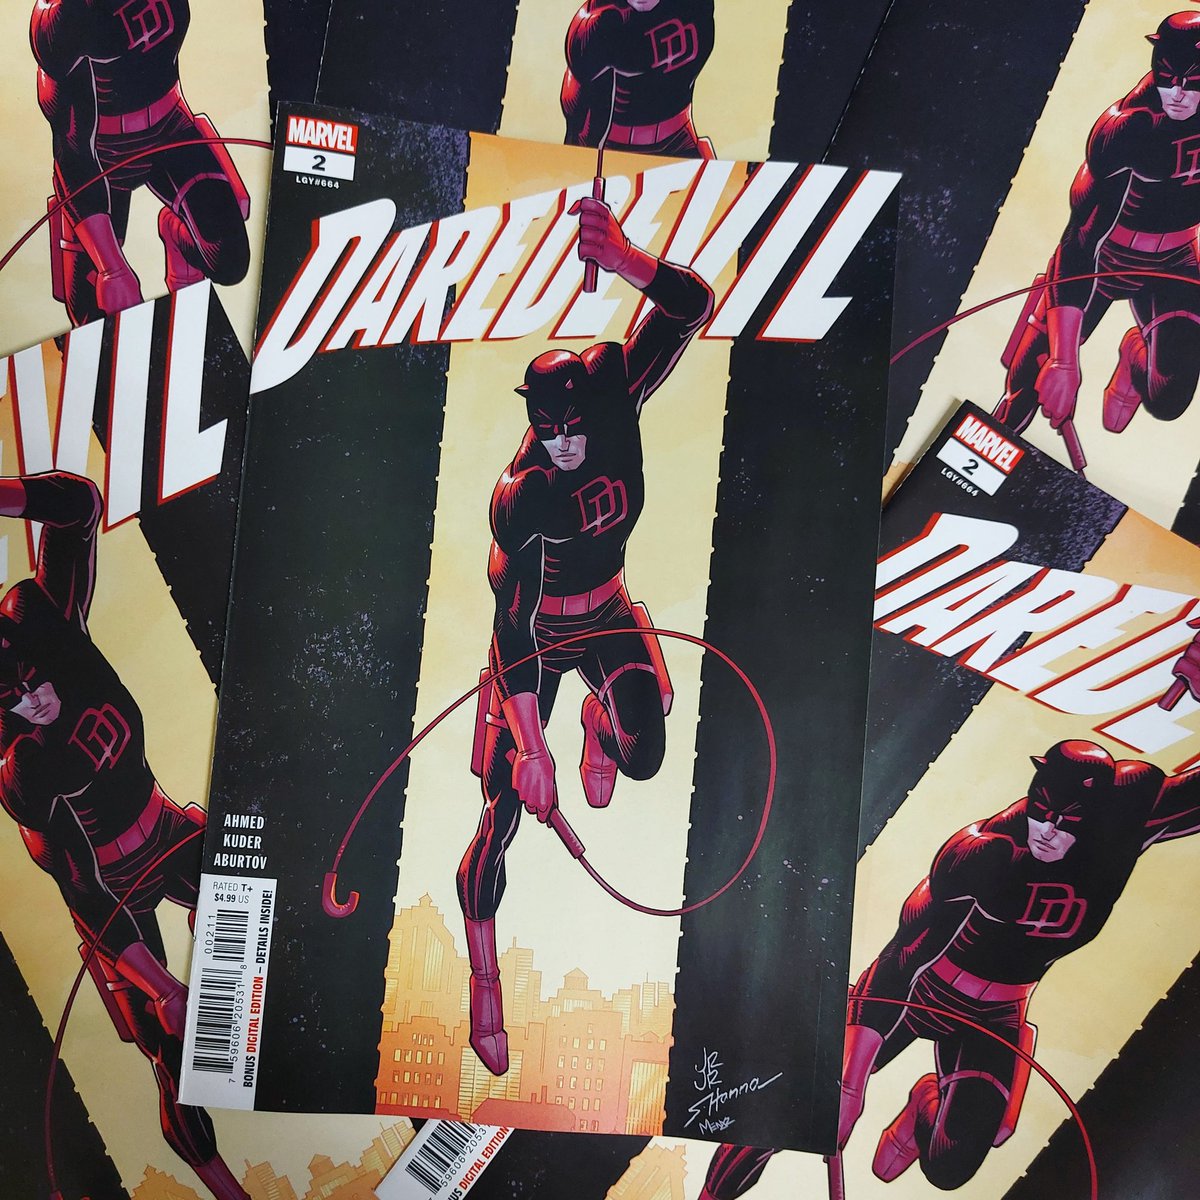 The Man Without Fear return in this week's Daredevil #2 from new creative team @saladinahmed & @AaronKuder.

It's an all-new status quo for Matt, but old habits die hard. We really enjoyed this 2nd issue, and we're looking forward to seeing where the team take Matt & the readers.